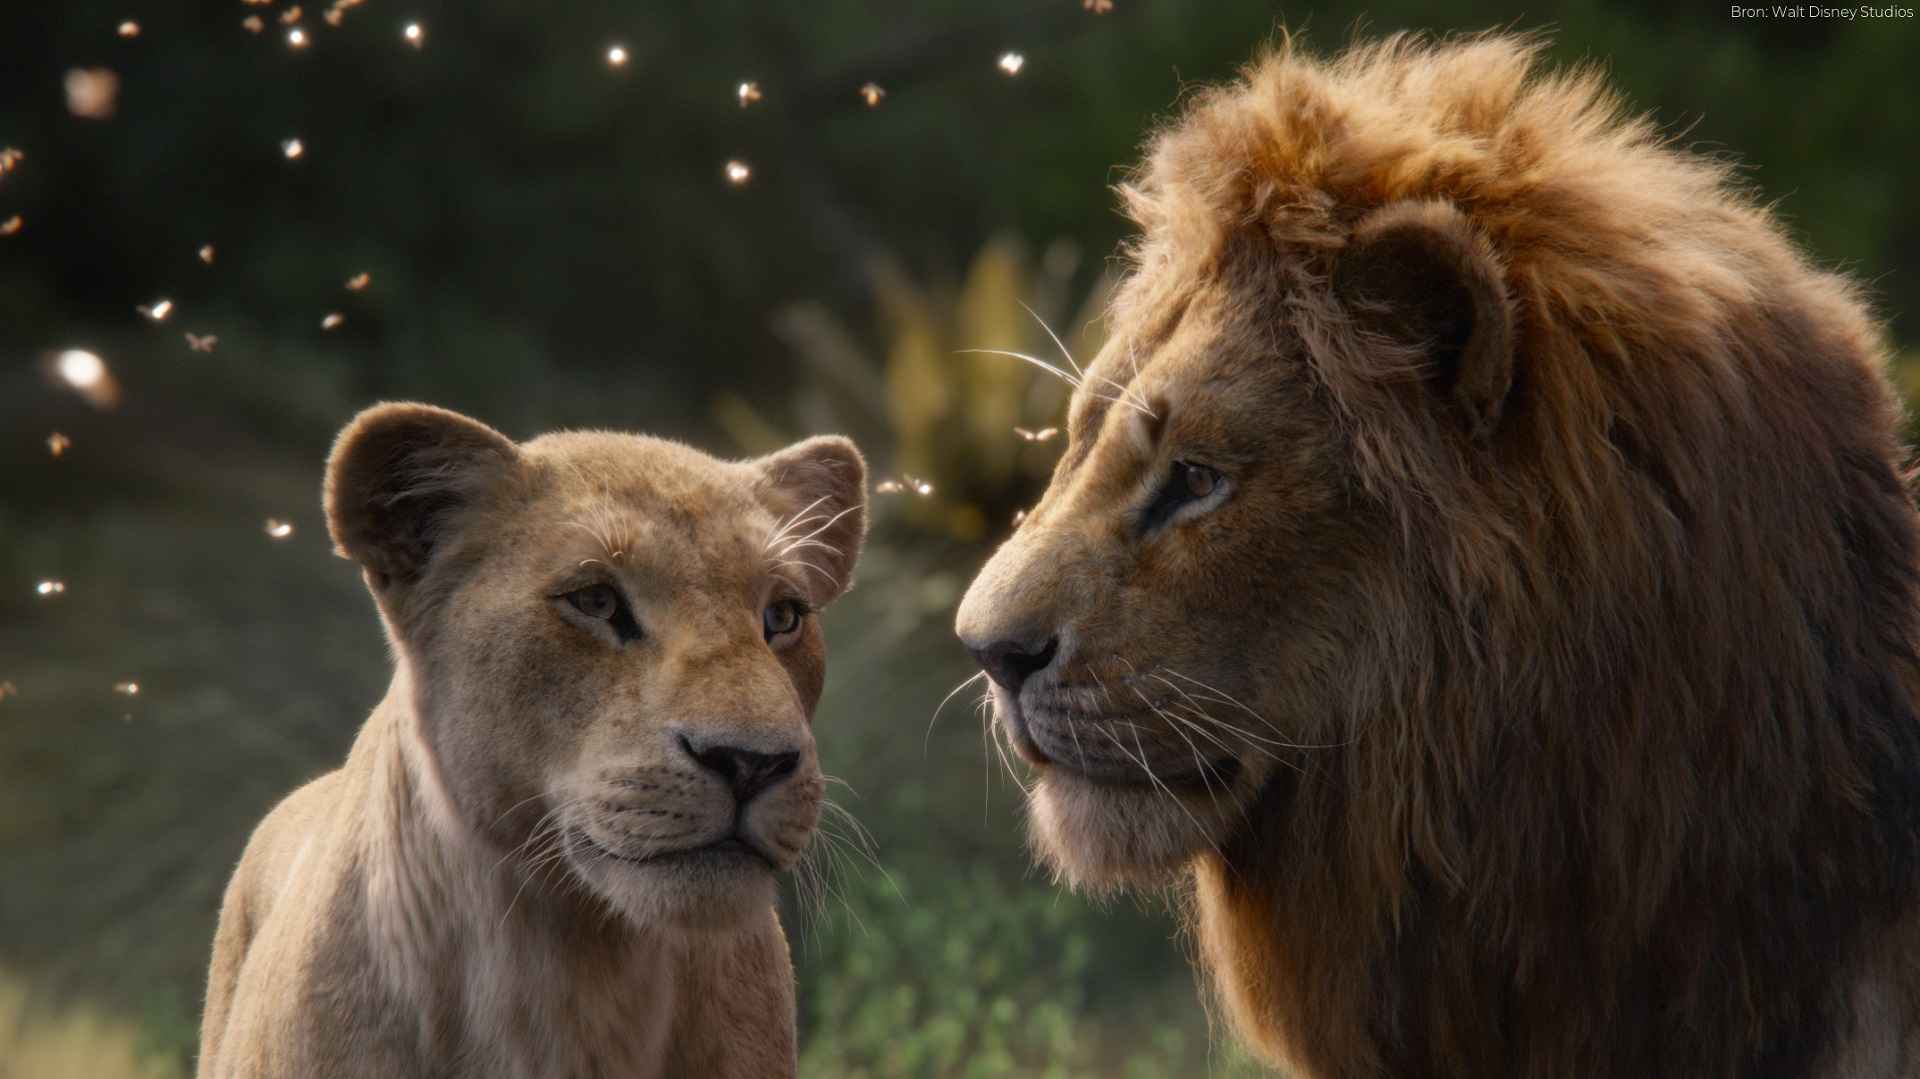 Characters of the cartoon "Lion King"